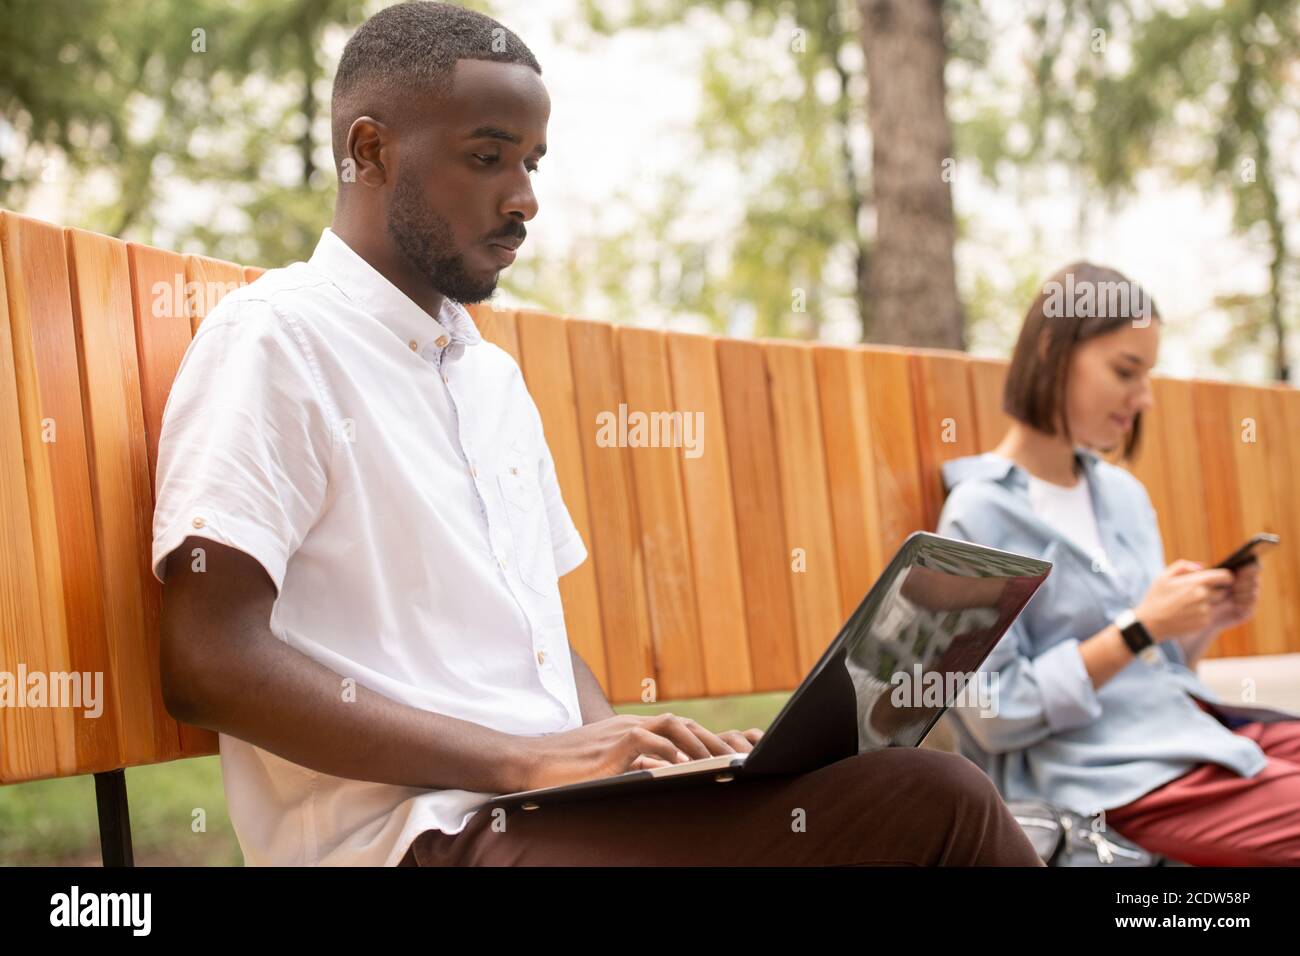 Serious guy of African ethnicity in casualwear networking on bench in park Stock Photo